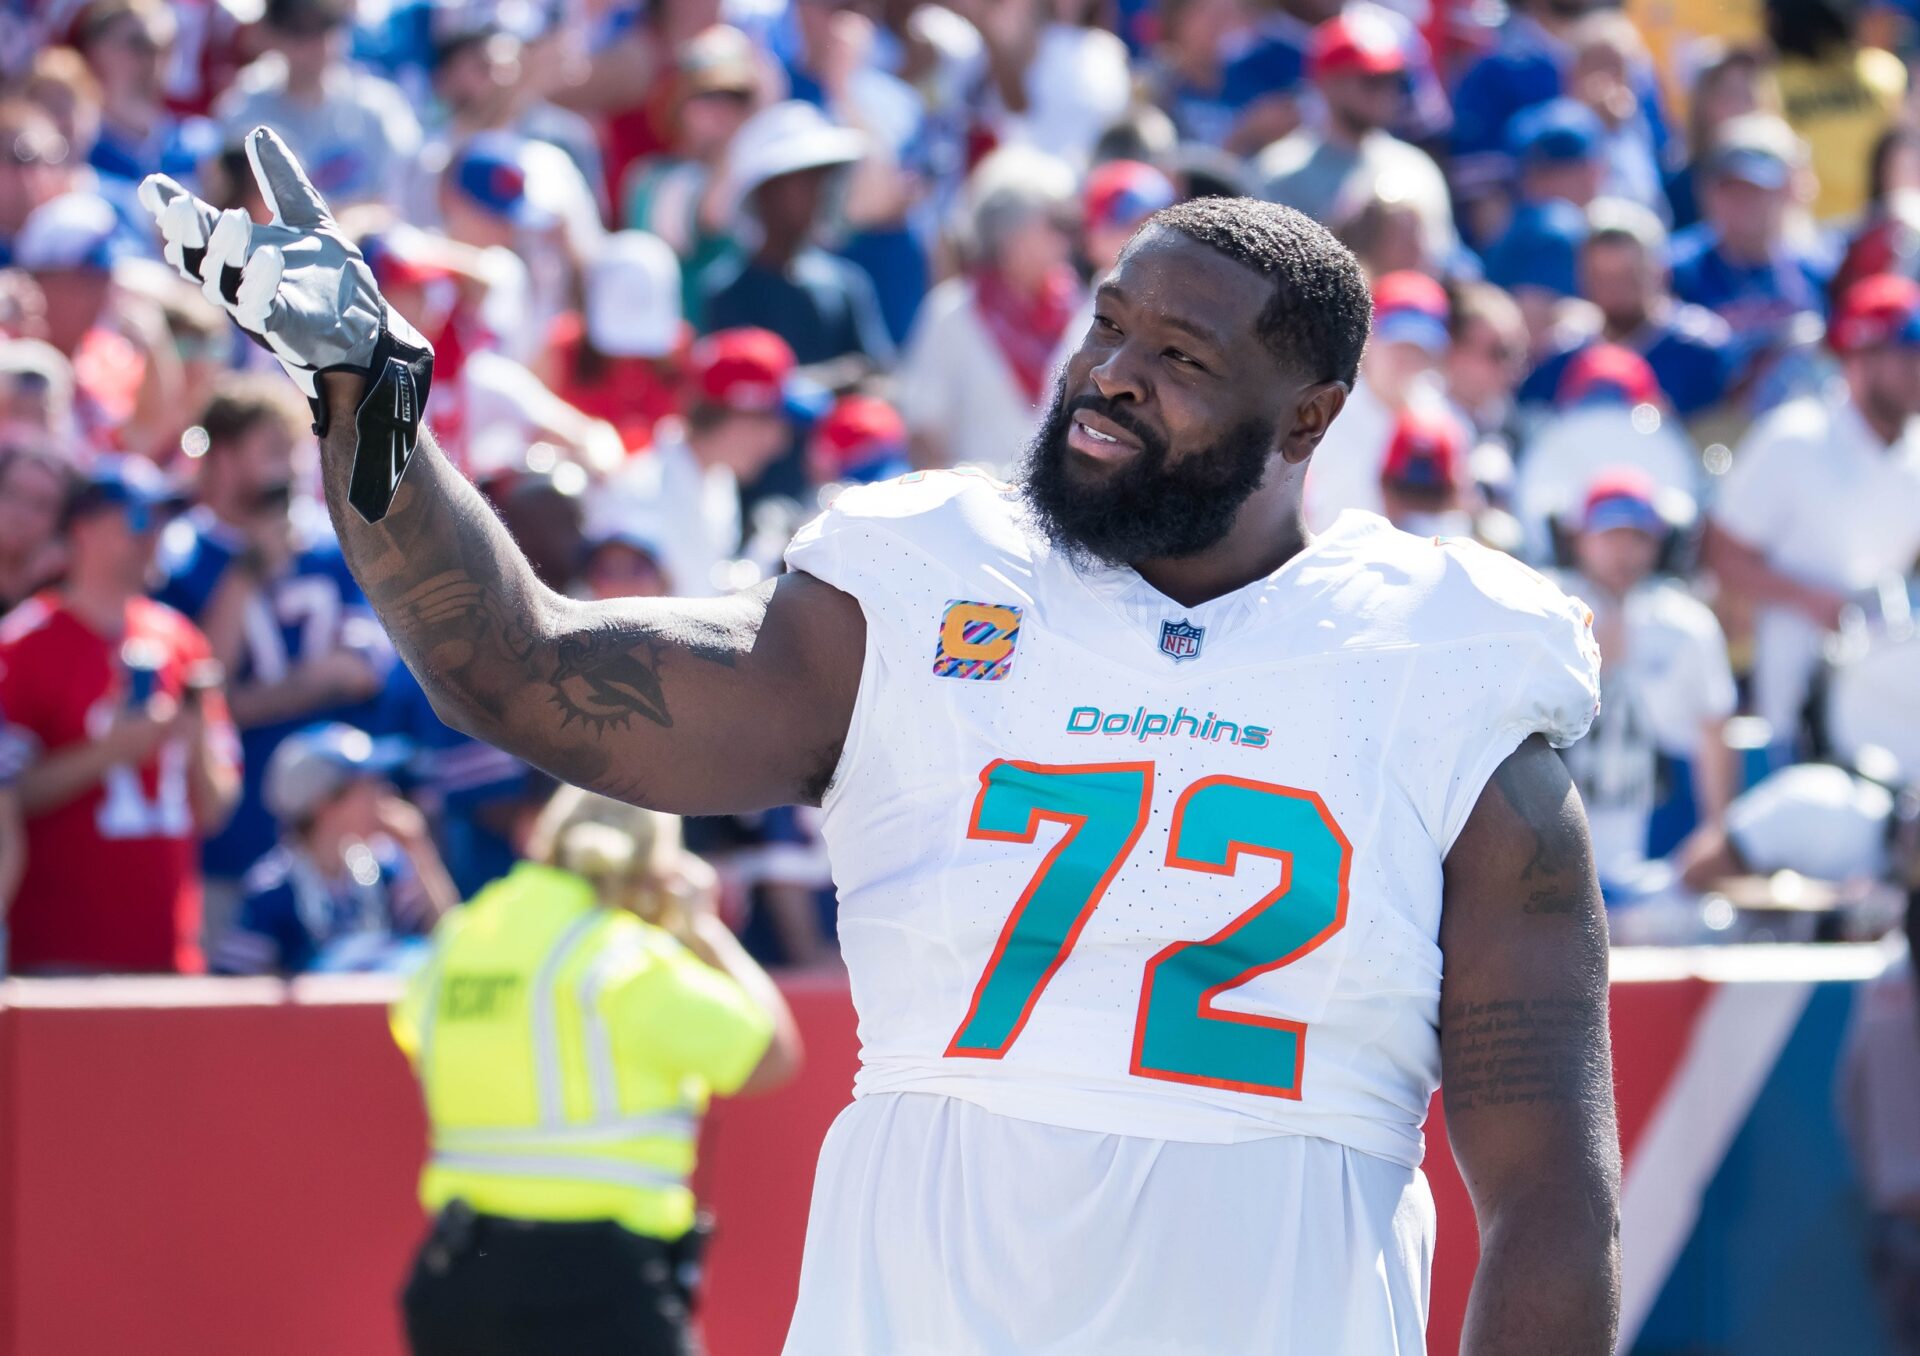 Miami Dolphins offensive tackle Terron Armstead (72) reacts to the crowd before a game against the Buffalo Bills.